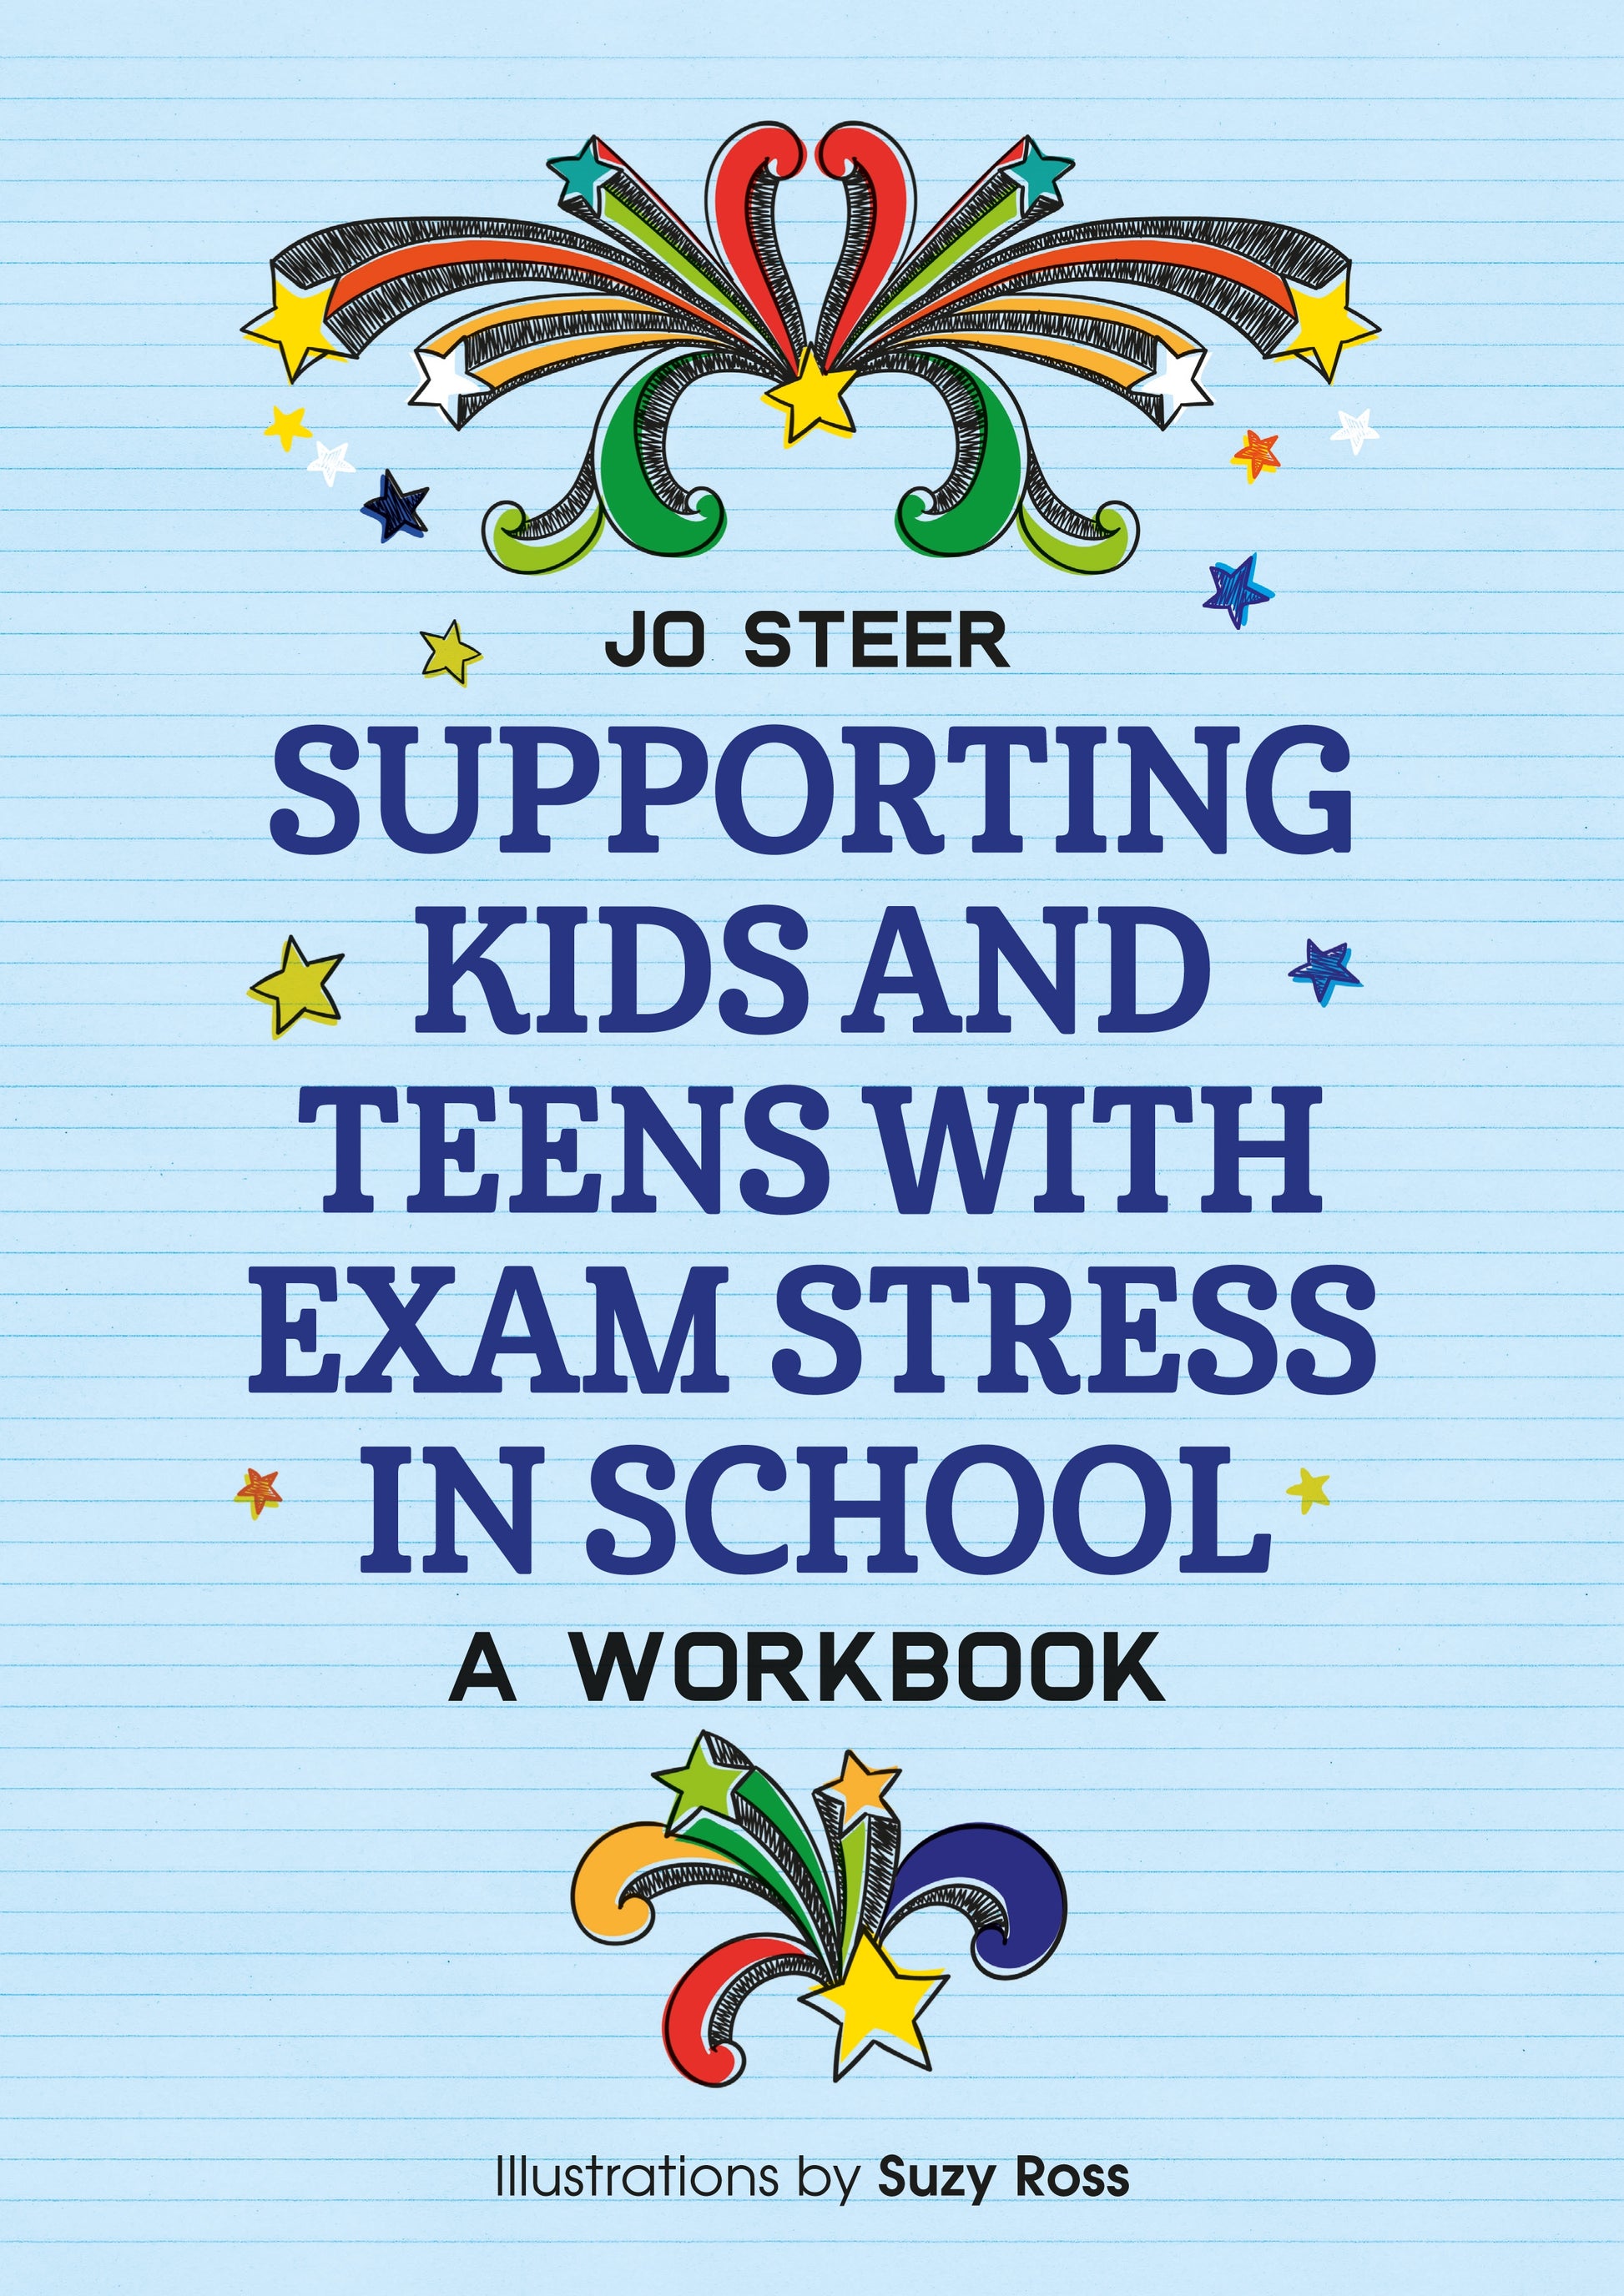 Supporting Kids and Teens with Exam Stress in School by Joanne Steer, Suzy Ross